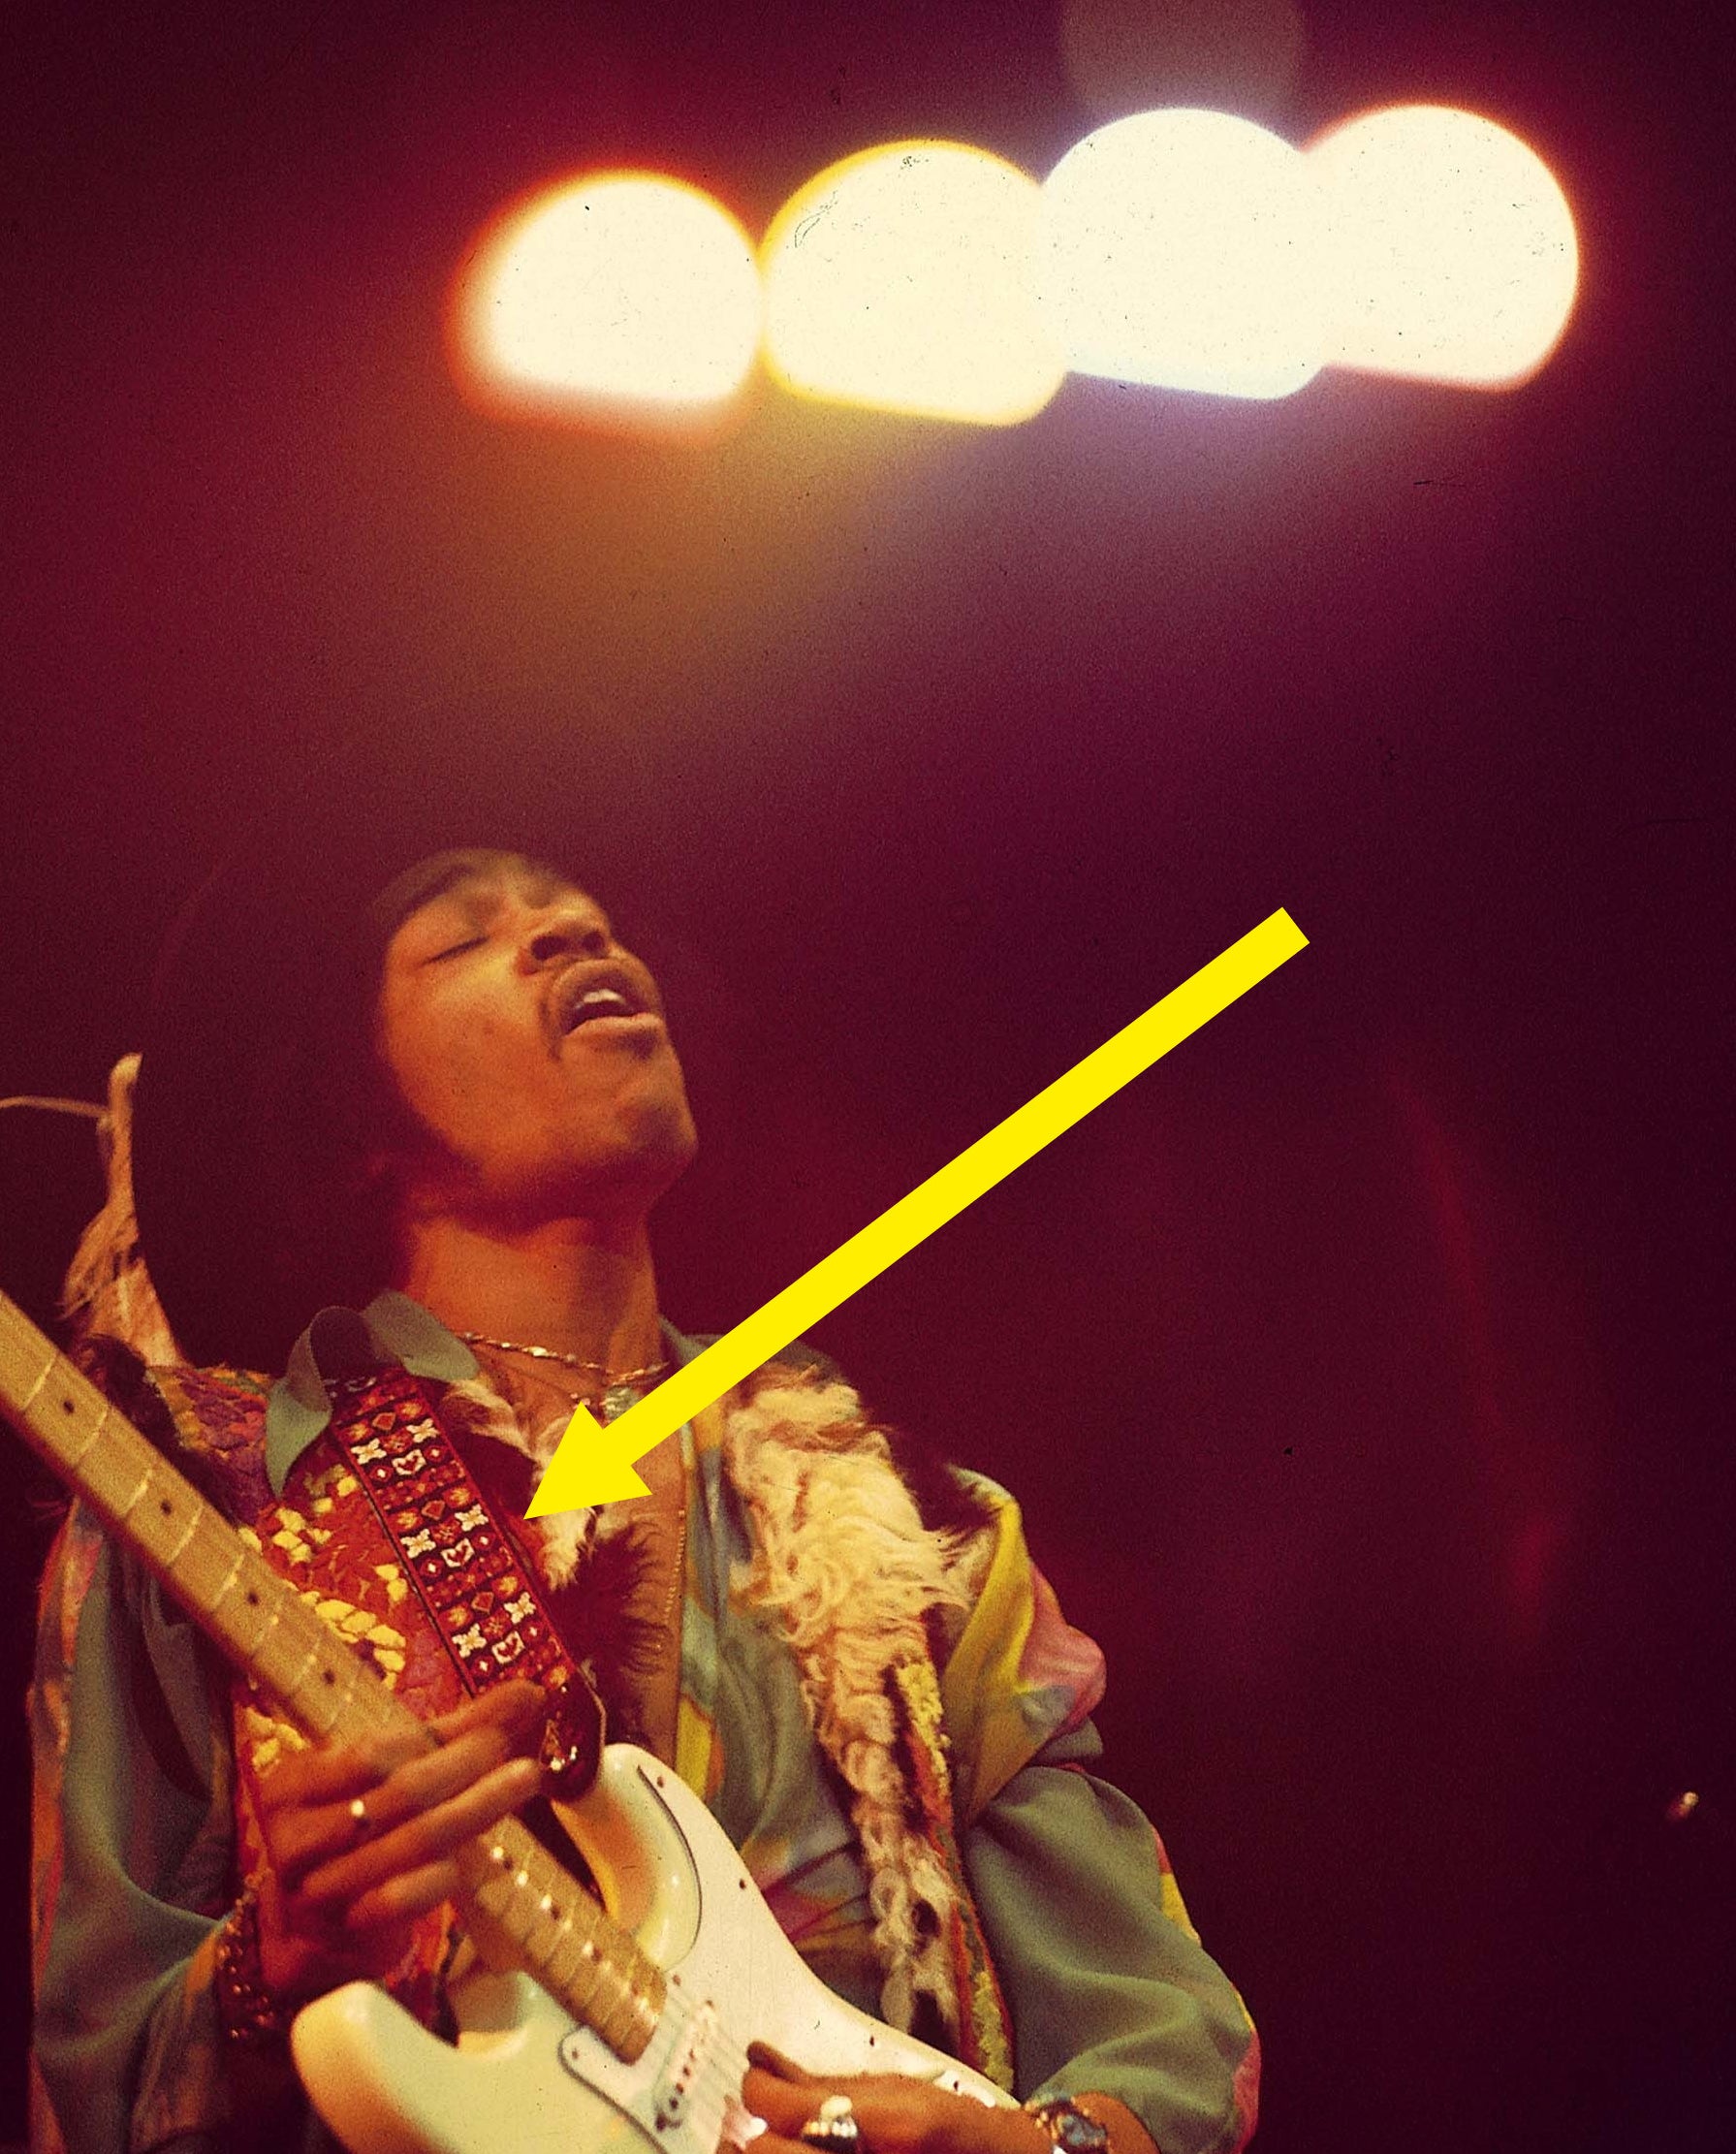 Jimi playing with the guitar strap